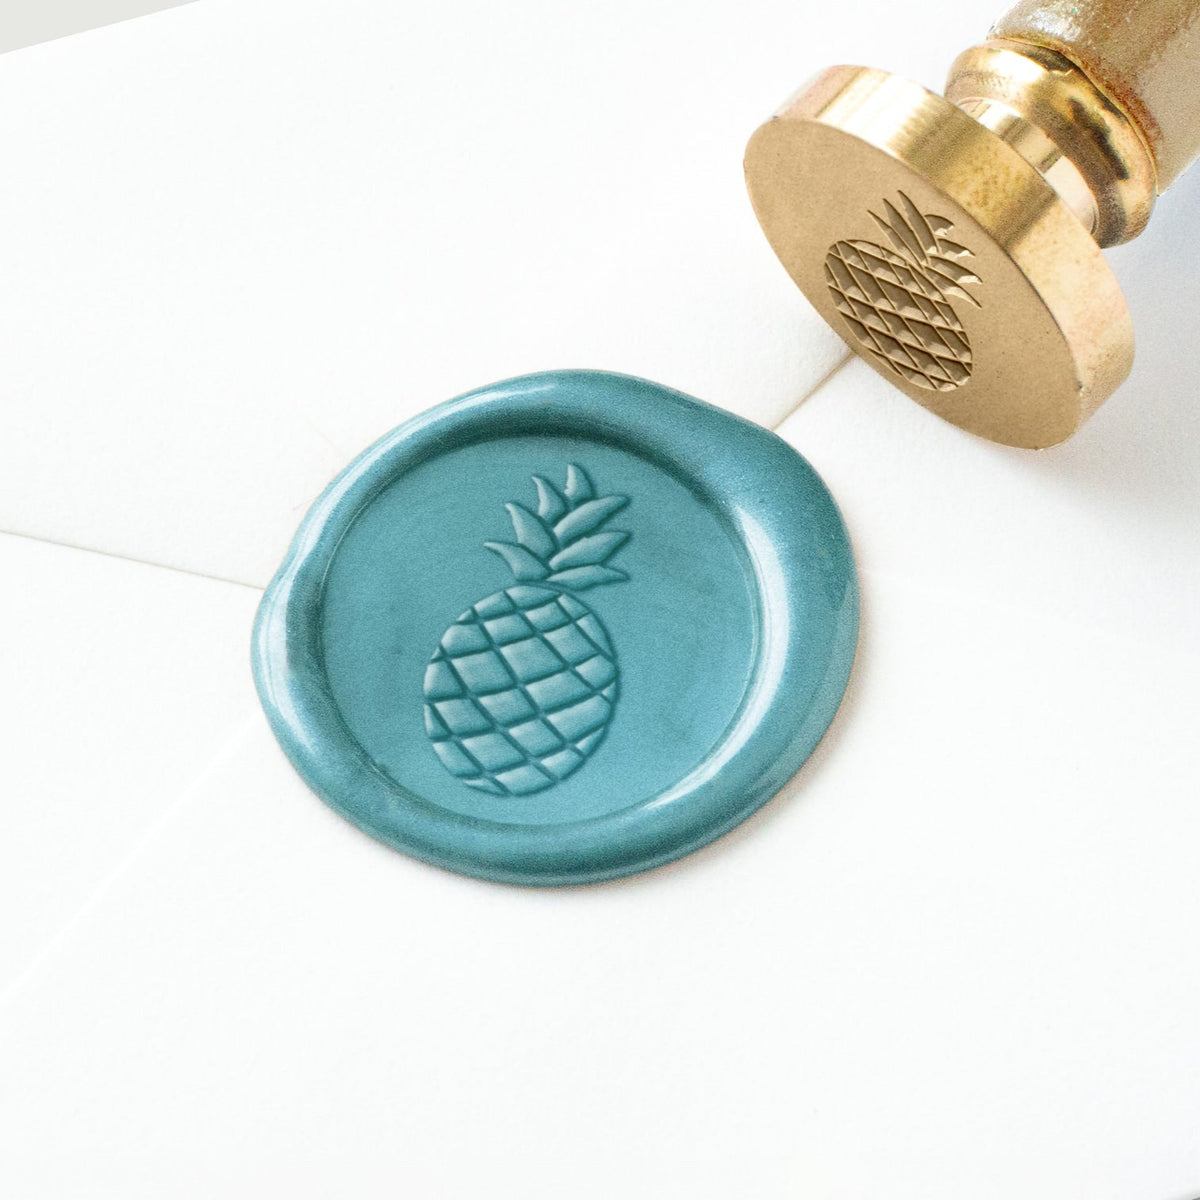 Pineapple Wax Seal Stamp – Ladd Stamps